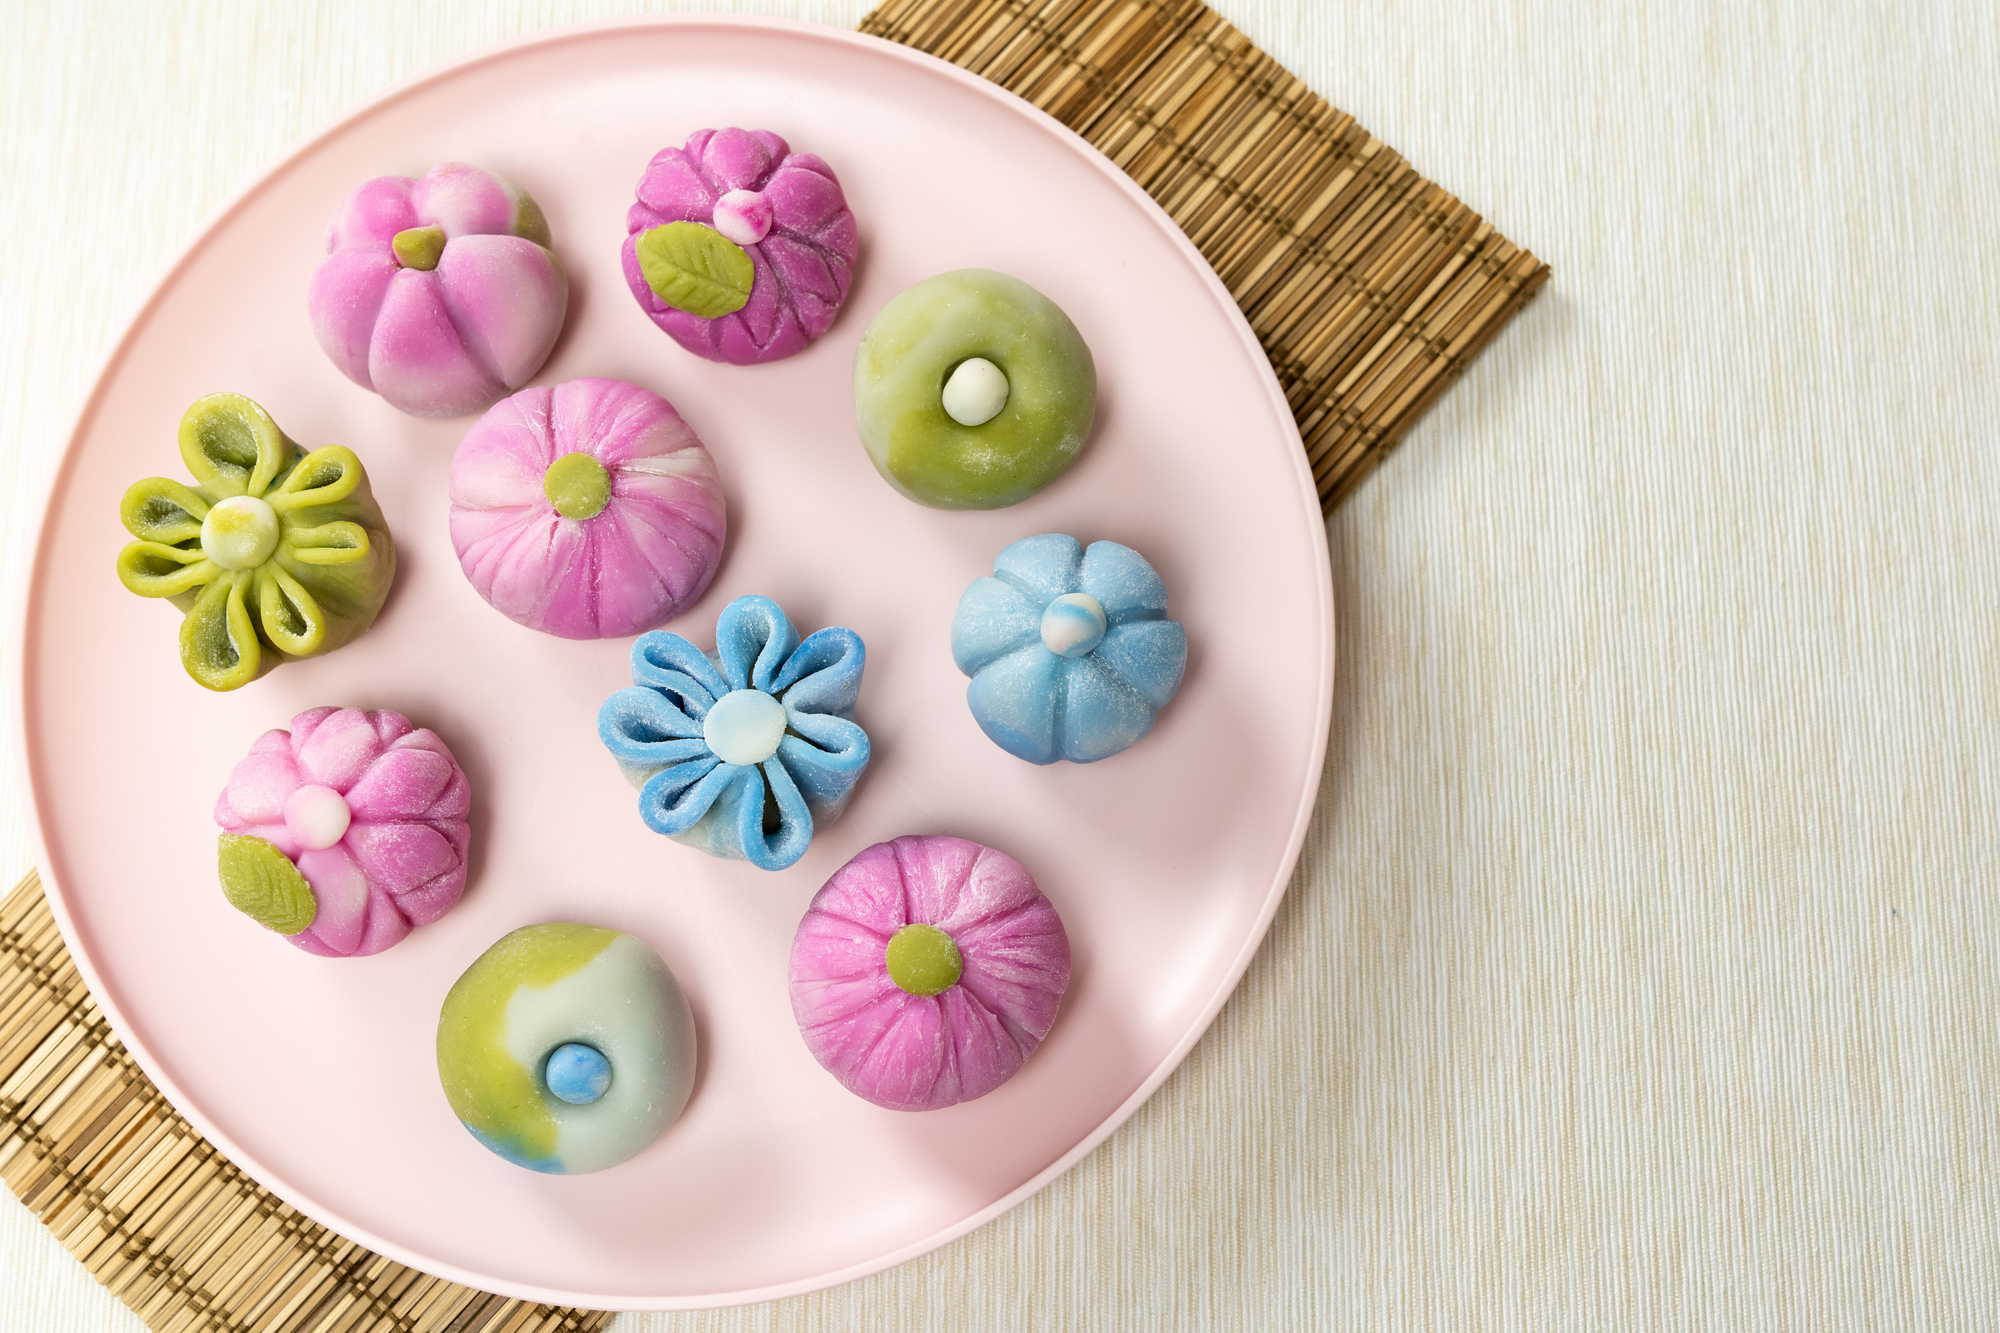 Traditional confectionery cake in Japan